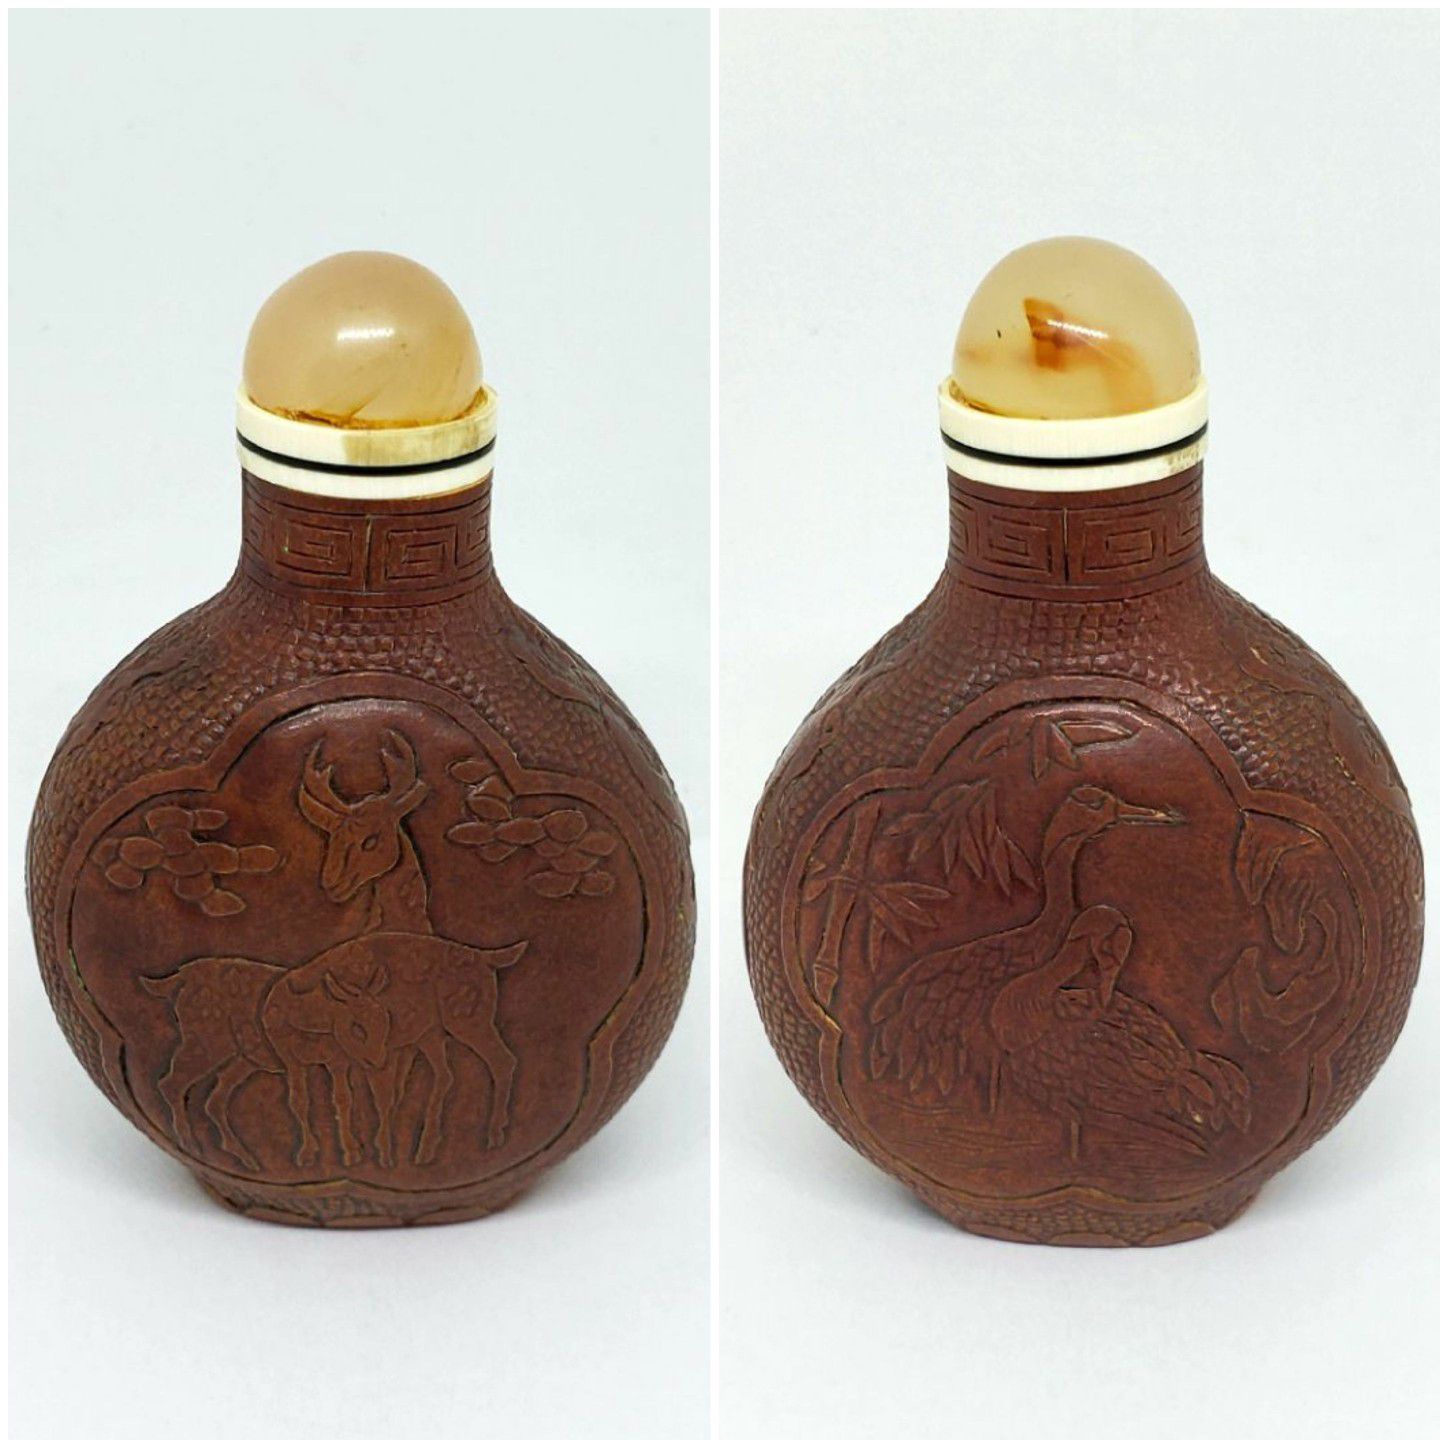 Molded gourd snuff bottle with jade stopper